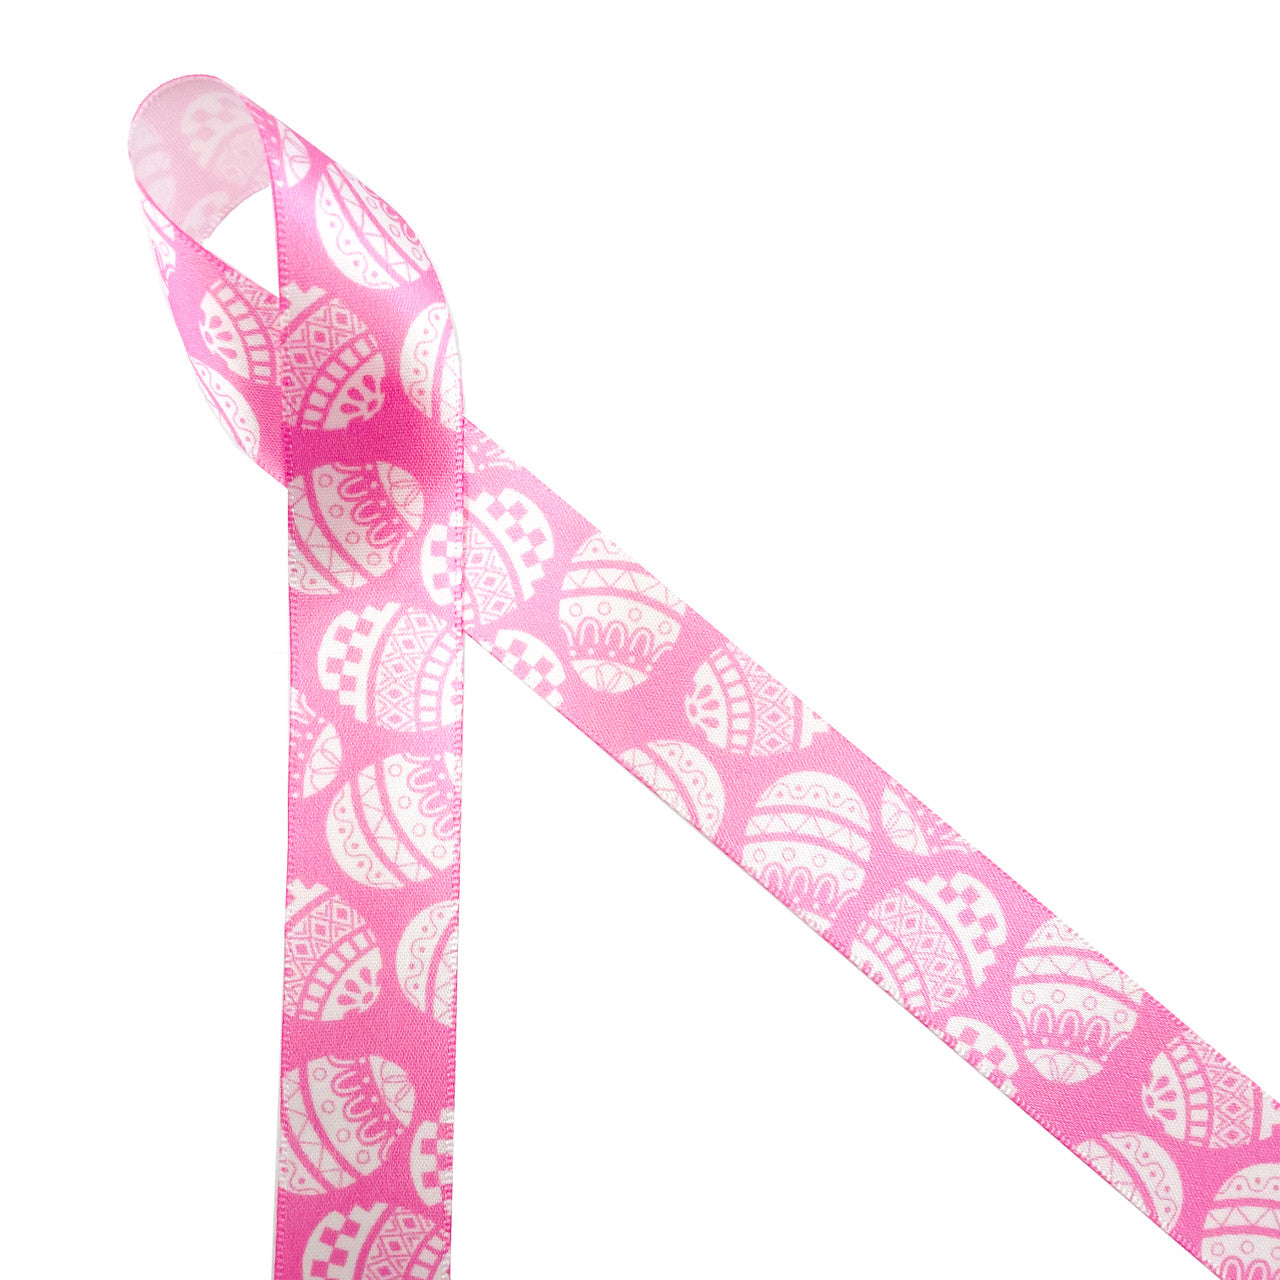 Easter Egg Ribbon stencil print in white with pink background printed on 7/8" white satin,